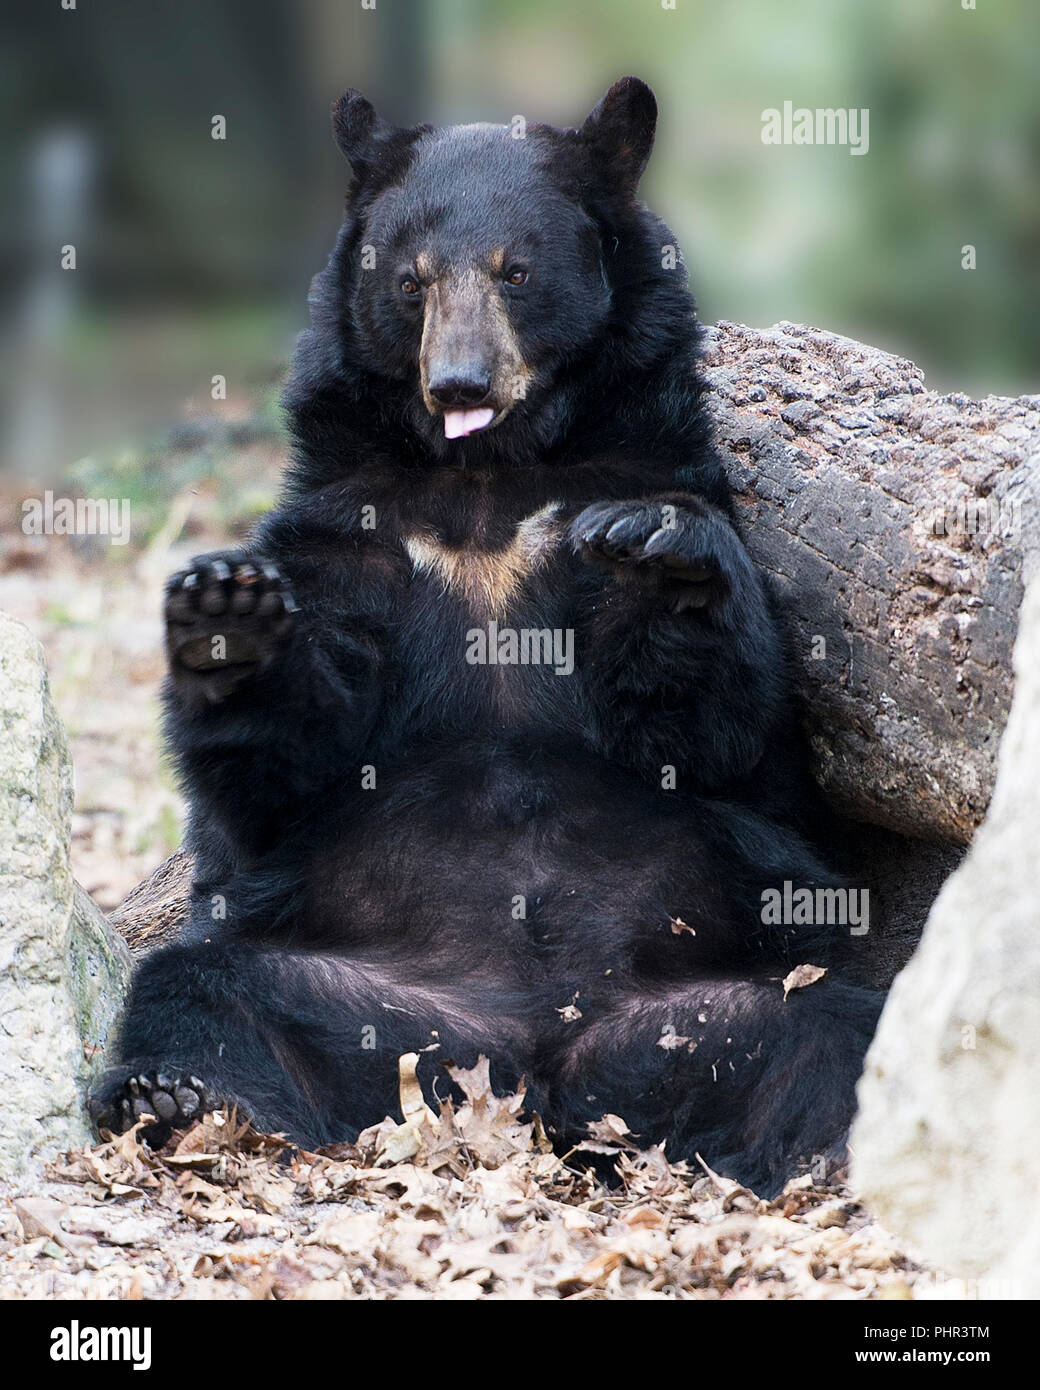 Black bear animal sitting and resting on a tree log making a comic show  with a bokeh background in its environment and surrounding Stock Photo -  Alamy